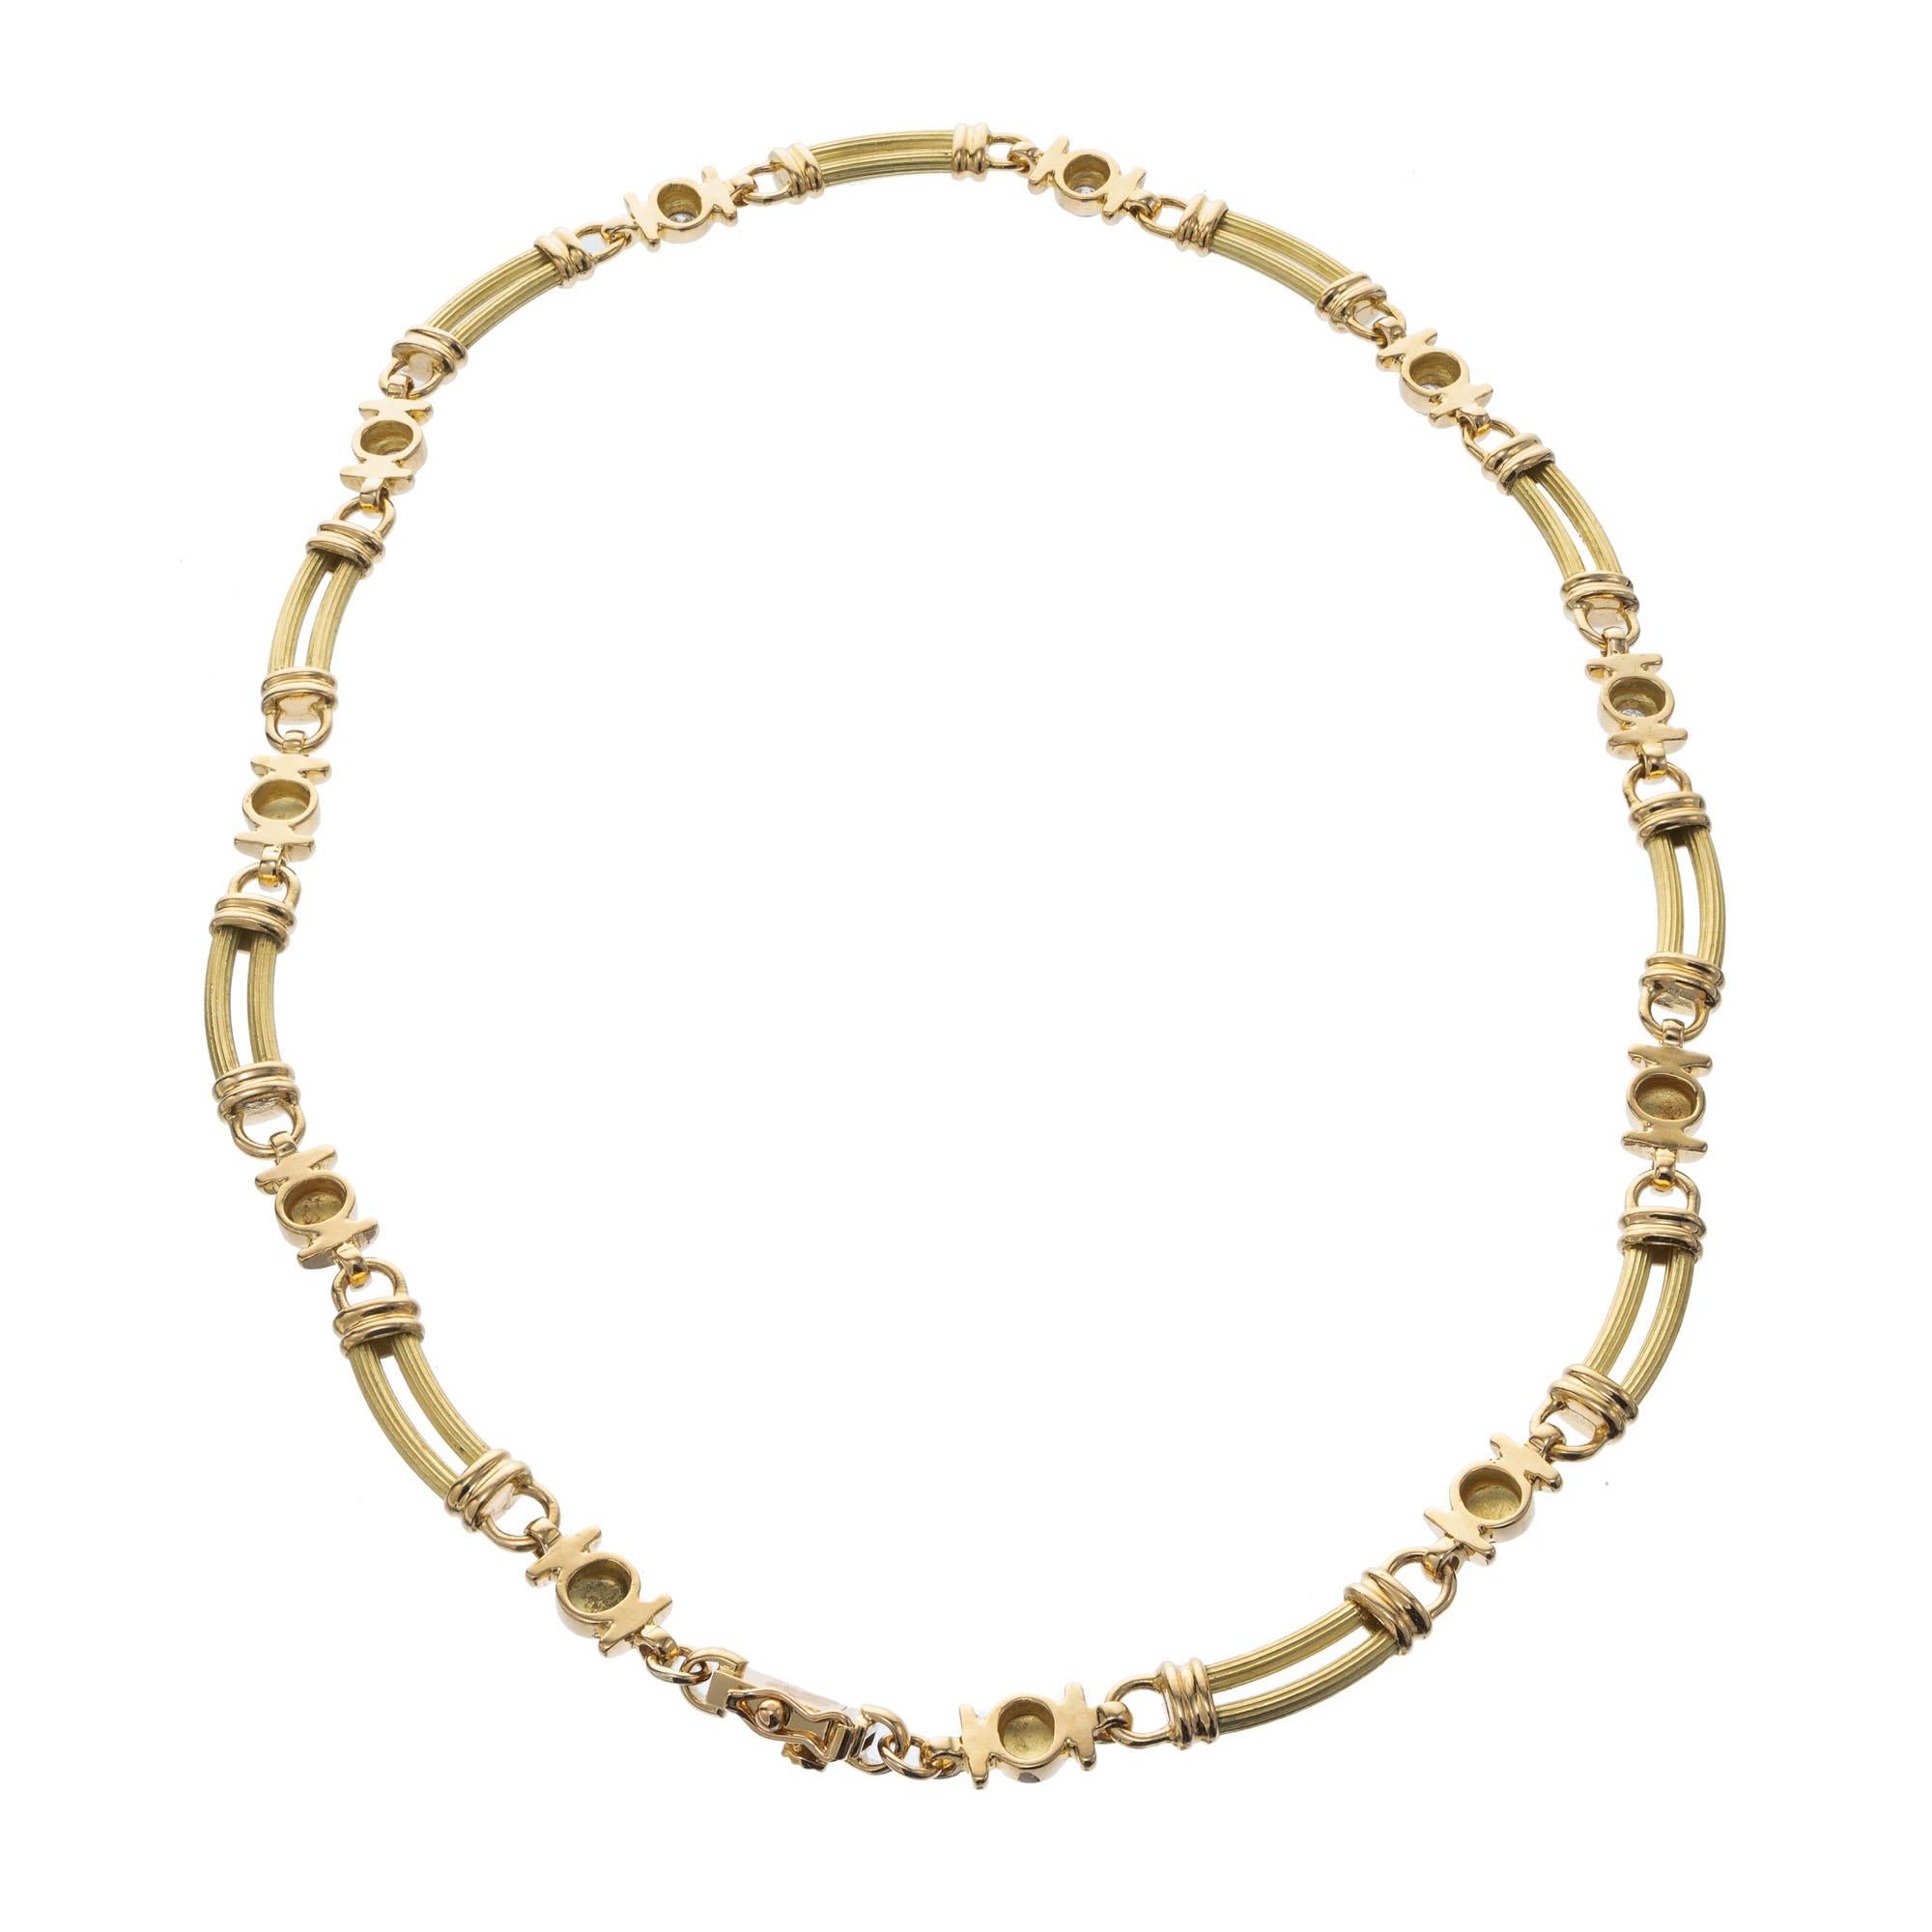 Texteured 18k yellow gold diamond necklace. 16 Inches in length with 5 round brilliant cut accent diamonds. 

5 round brilliant cut diamonds, G-H SI approx. .85cts
18k yellow gold 
Stamped: 18k
45.6 grams
Chain: 16 Inches
Width: